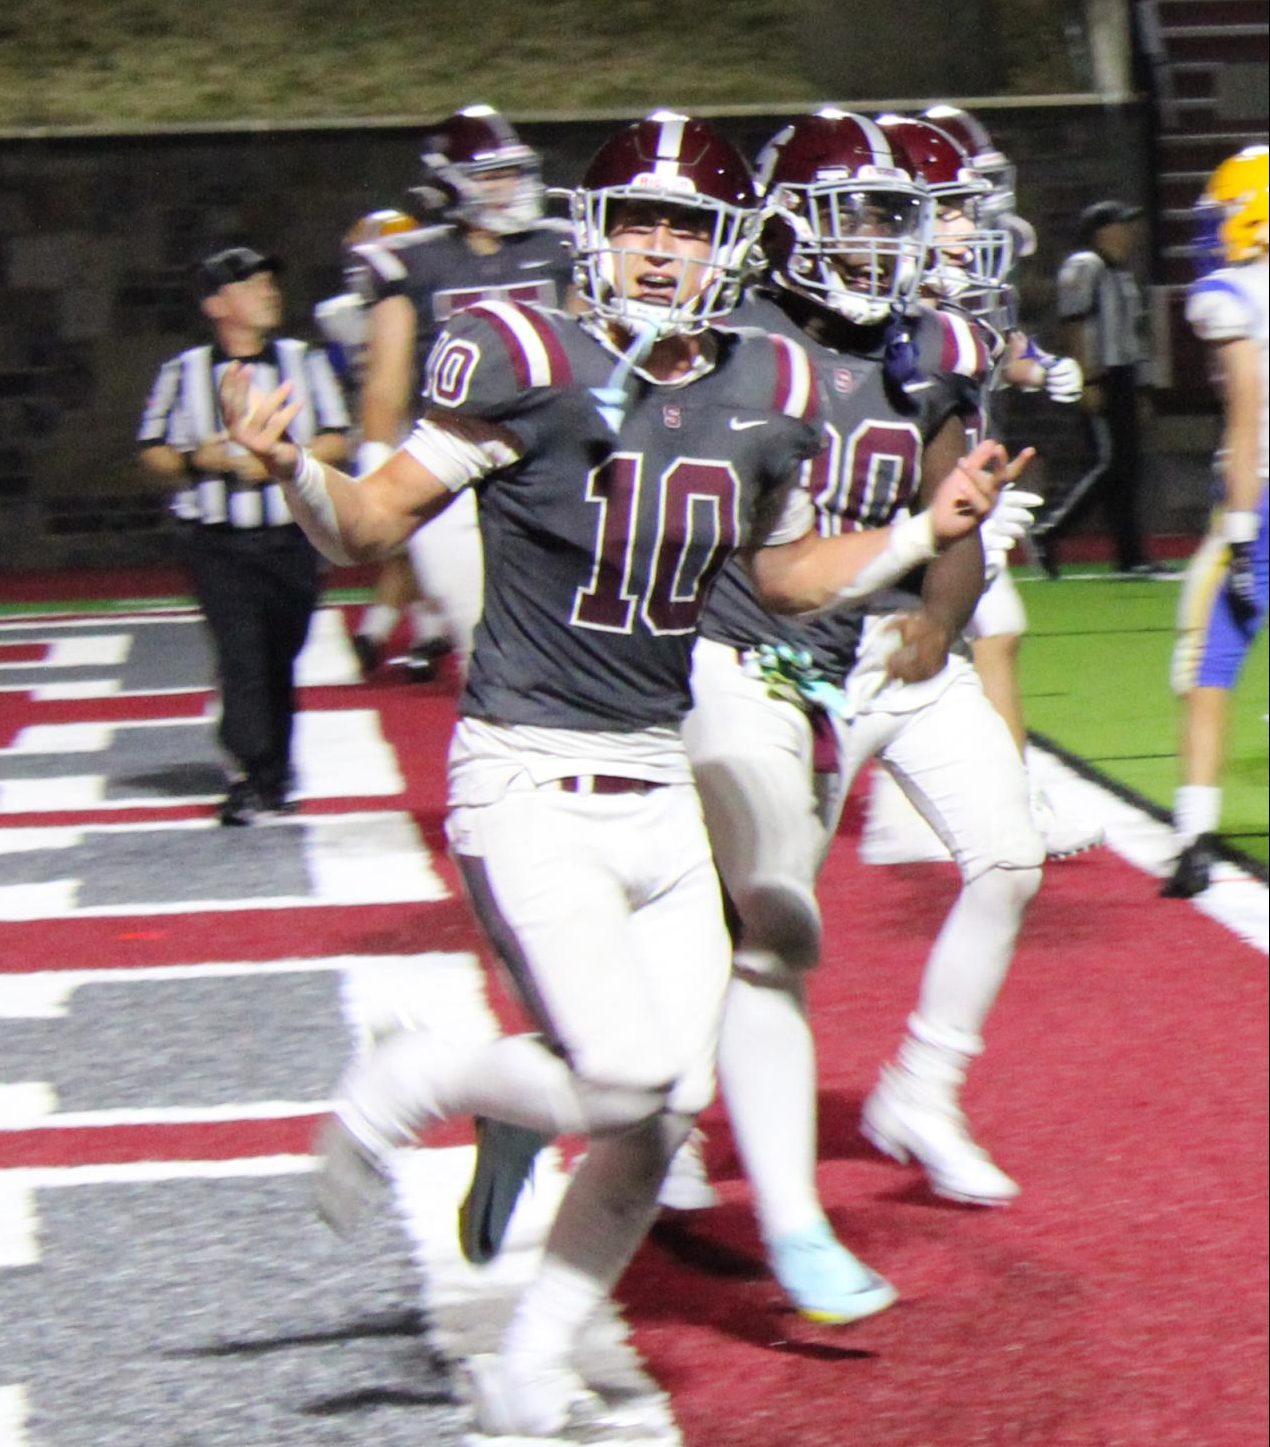 Michael Gaul celebrating a touchdown in the fourth quarter.